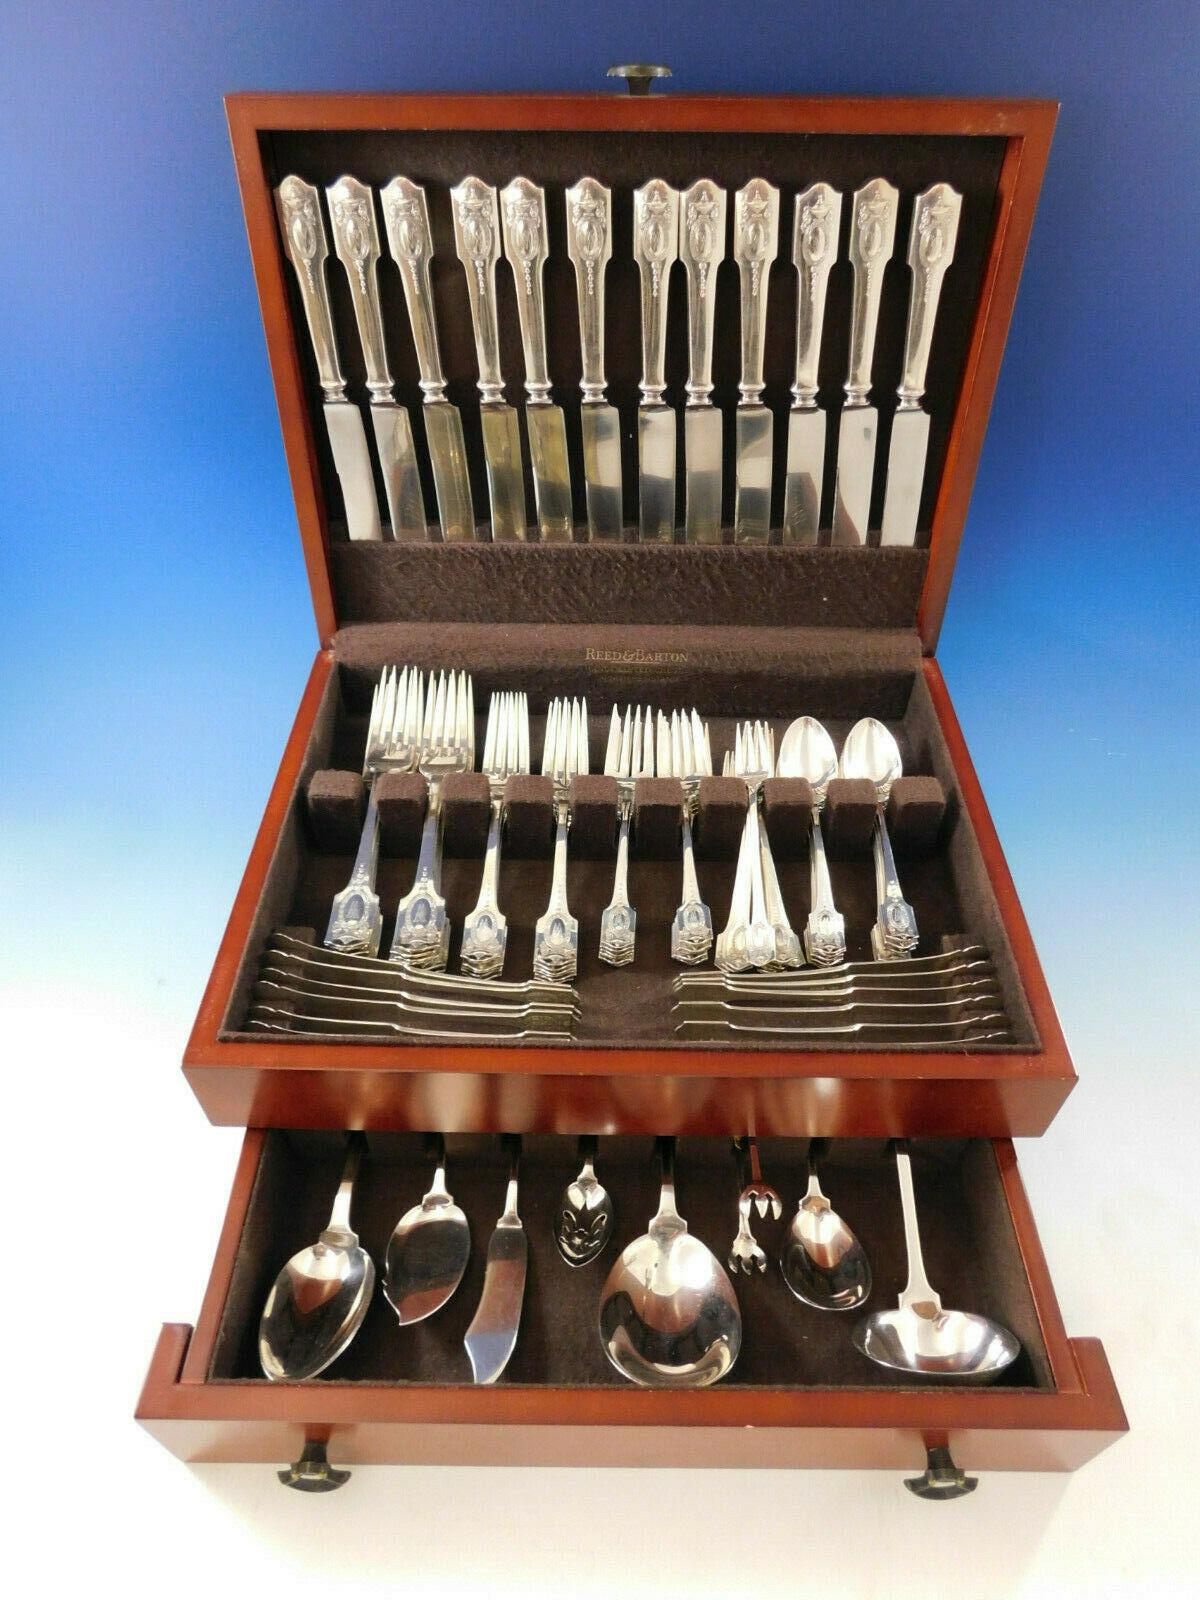 Rare dinner size Adam by Shreve & Co. sterling silver flatware set, 93 pieces. This pattern was introduced in the year 1909 and features an urn overflowing with flowers and swags with a central medallion. This set includes:

12 dinner size knives,